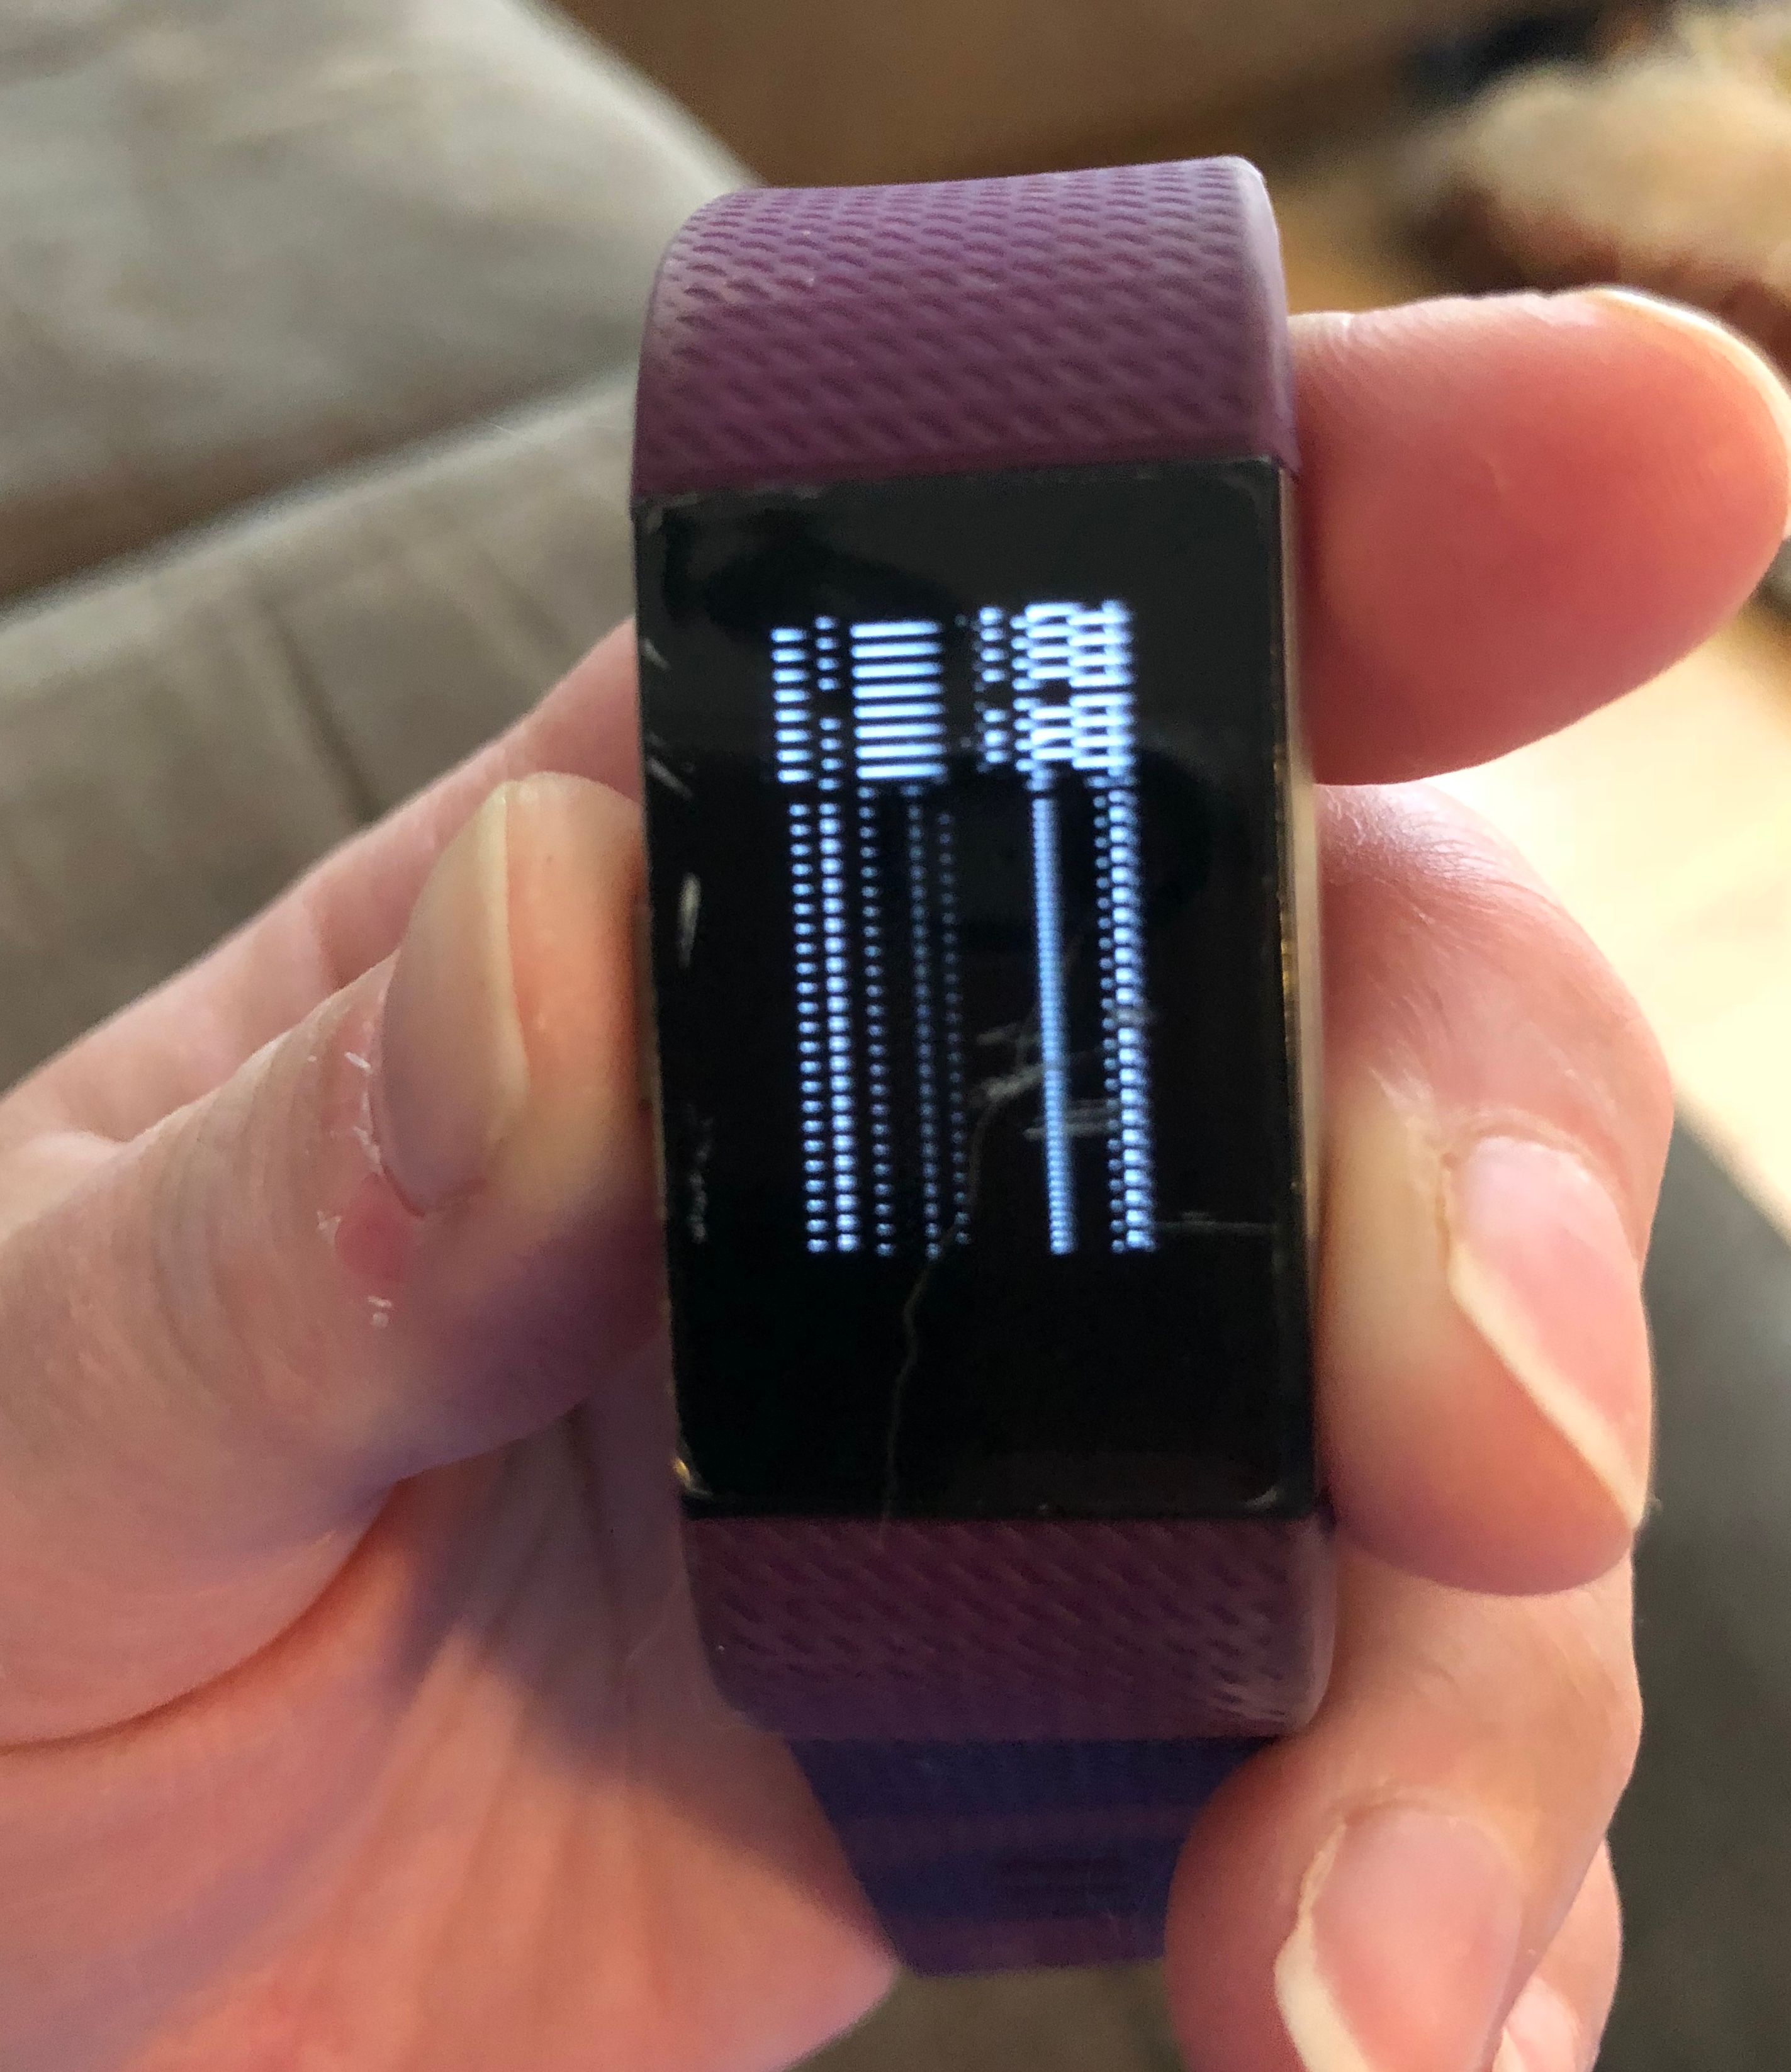 fitbit charge screen not working